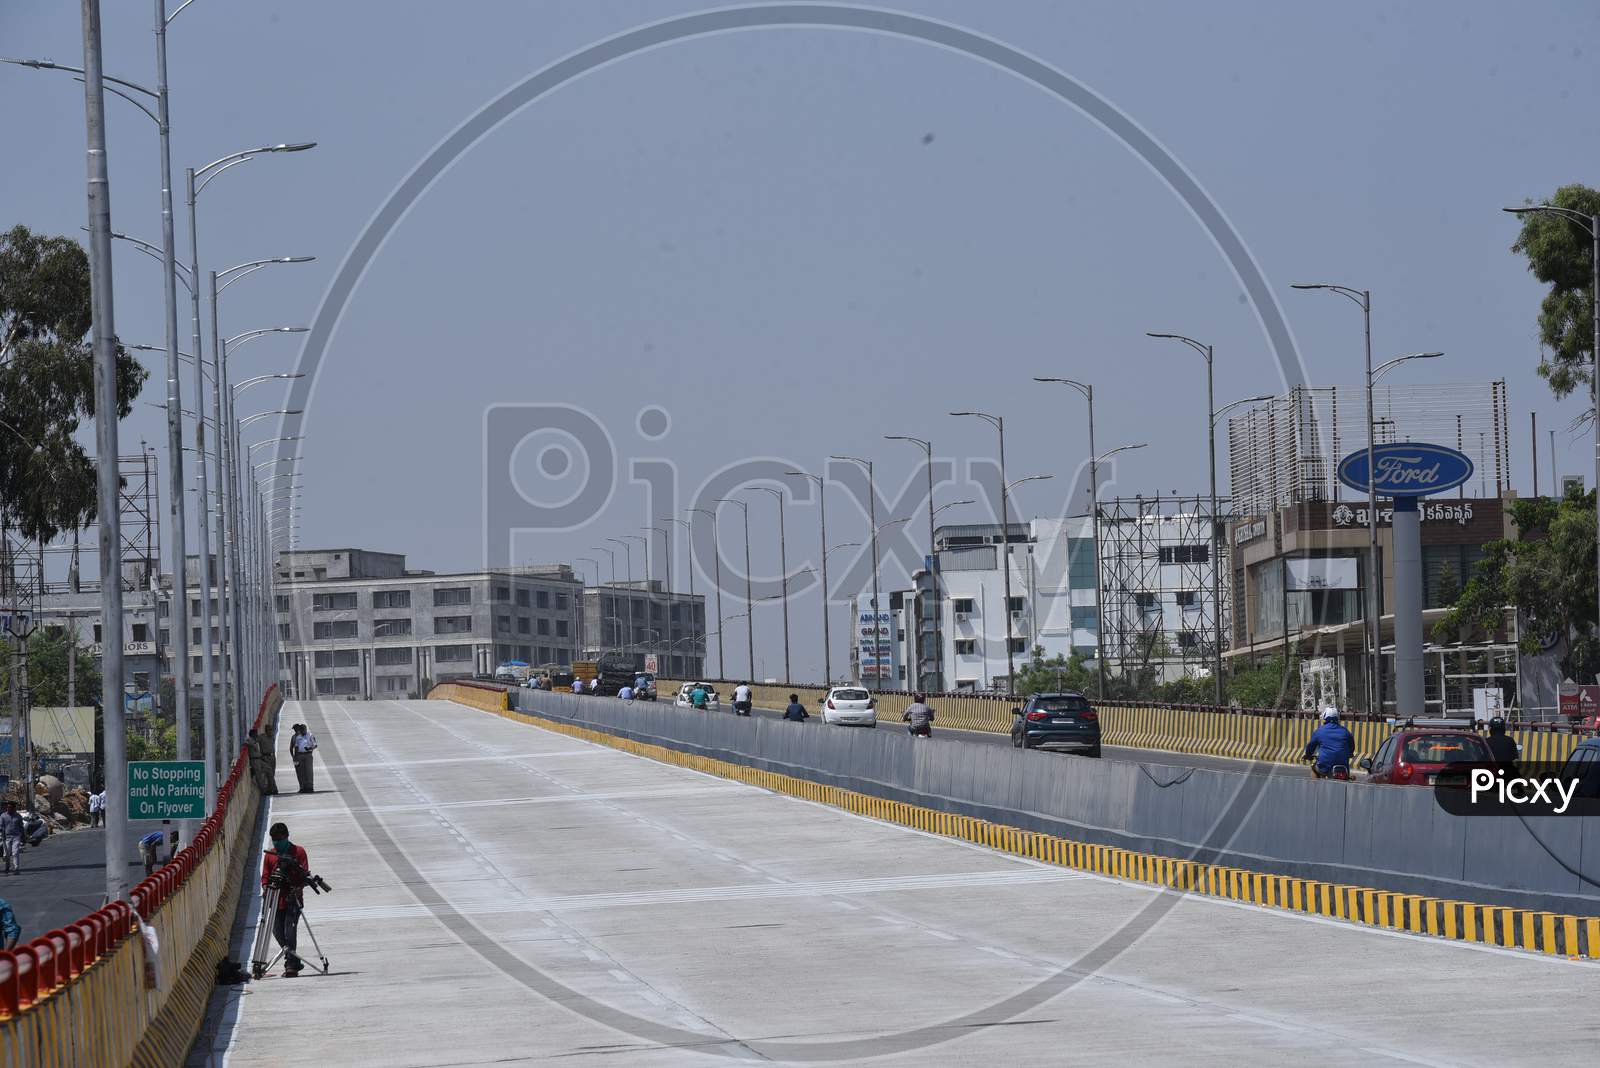 Kamineni Junction Flyover Inaugurated For Public Usage At LB Nagar in Hyderabad City on May 28,2020